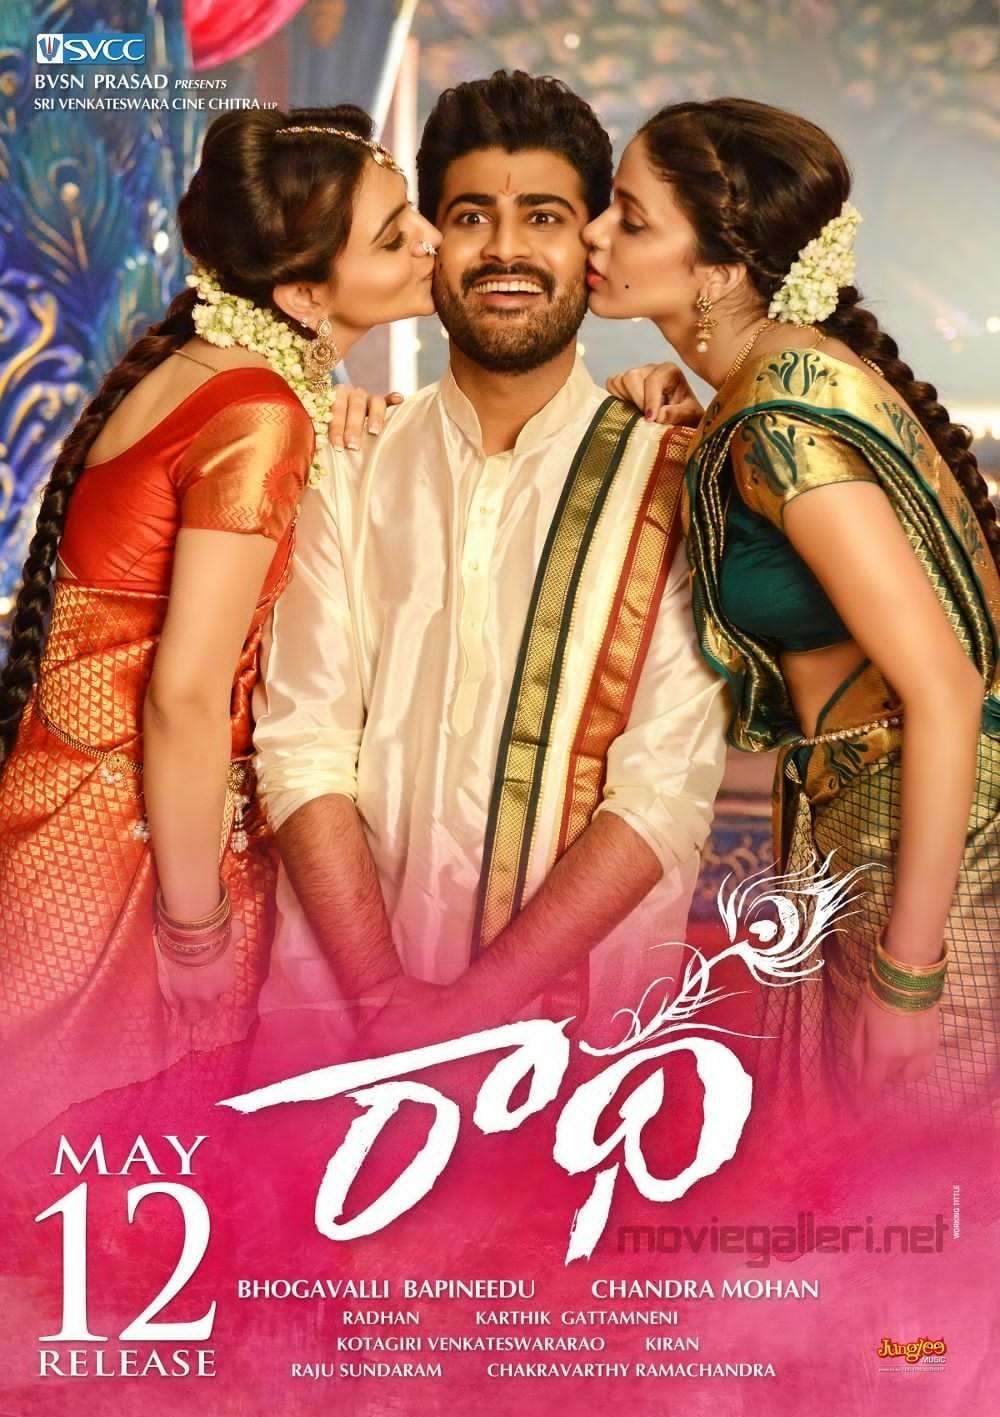 Poster for the movie "Radha"